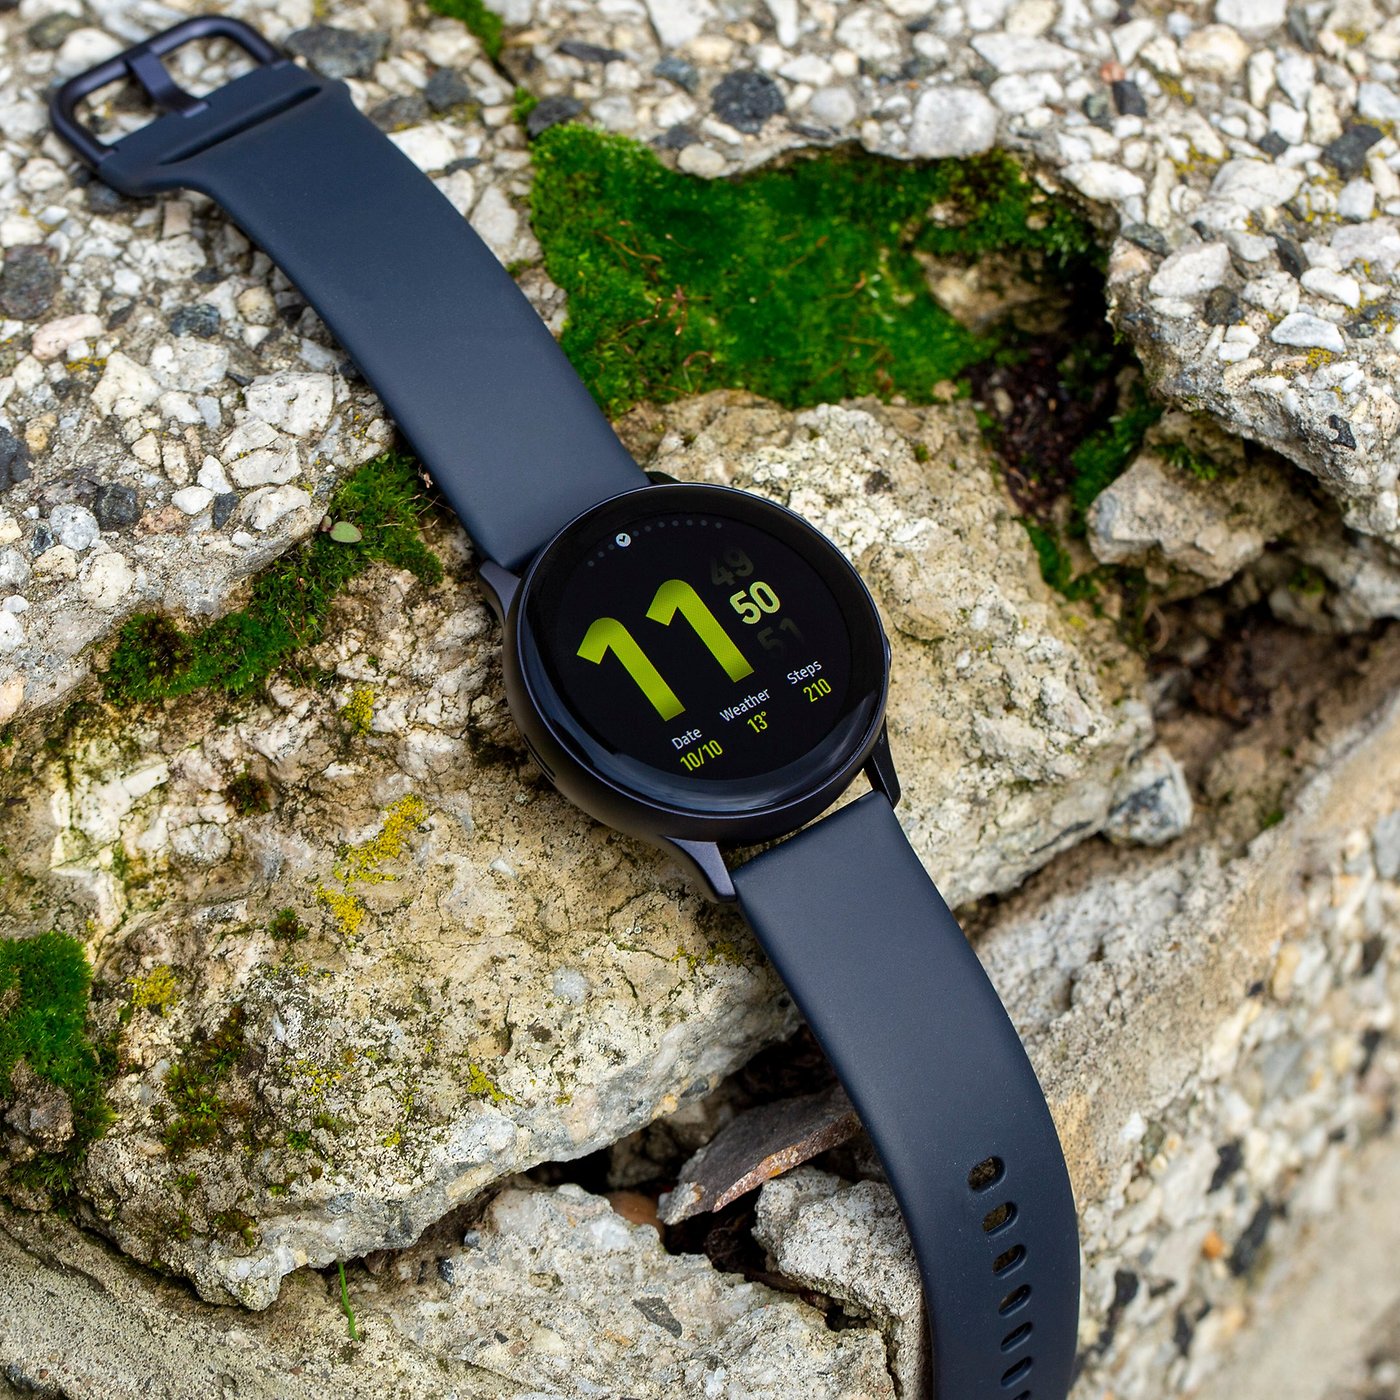 Samsung Galaxy Watch Active 2 review: the best Android smartwatch?